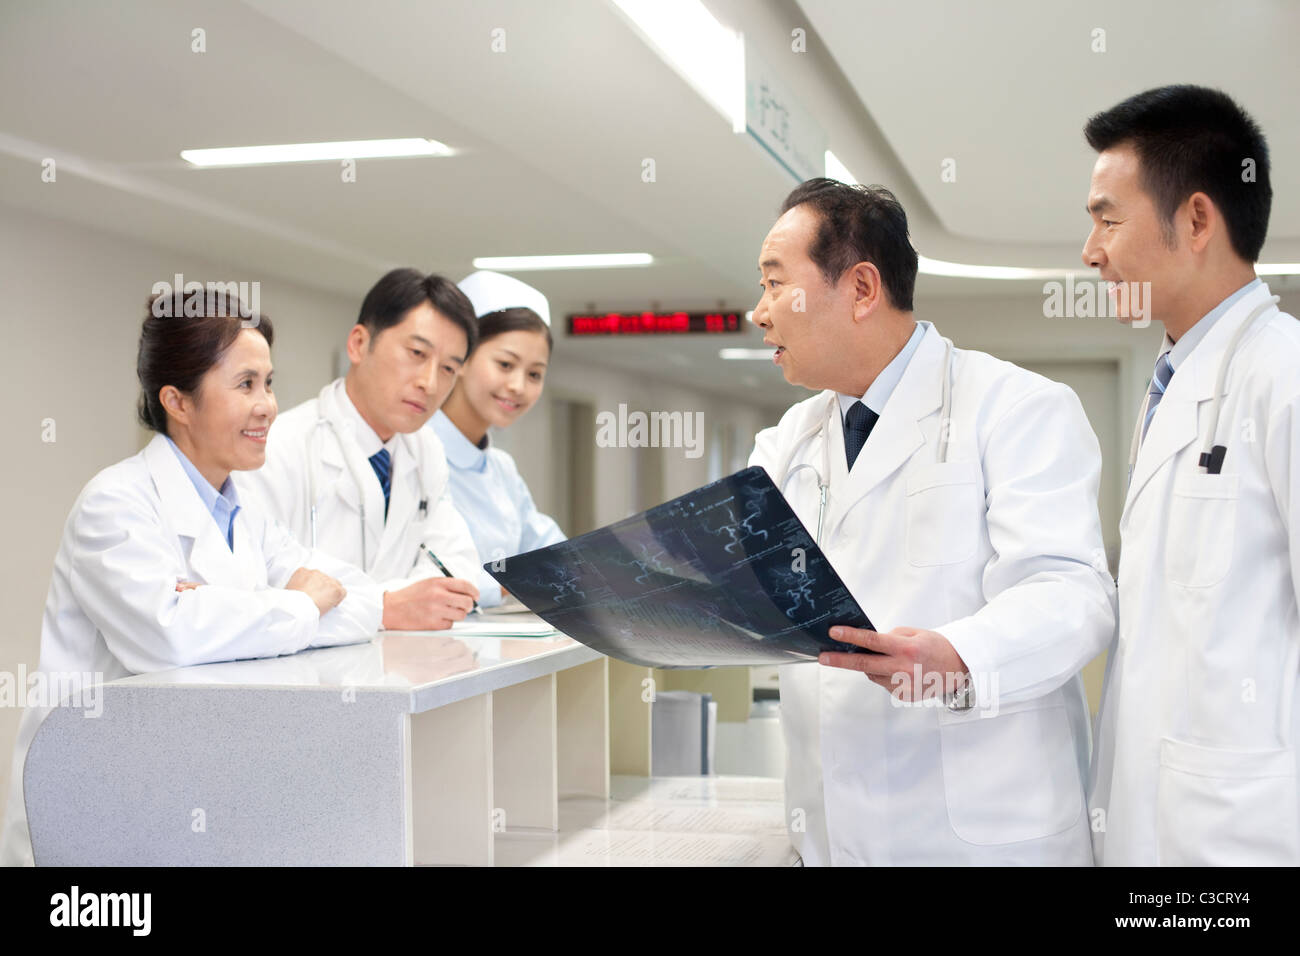 An older doctor showing a X-ray image to fellow doctors Stock Photo